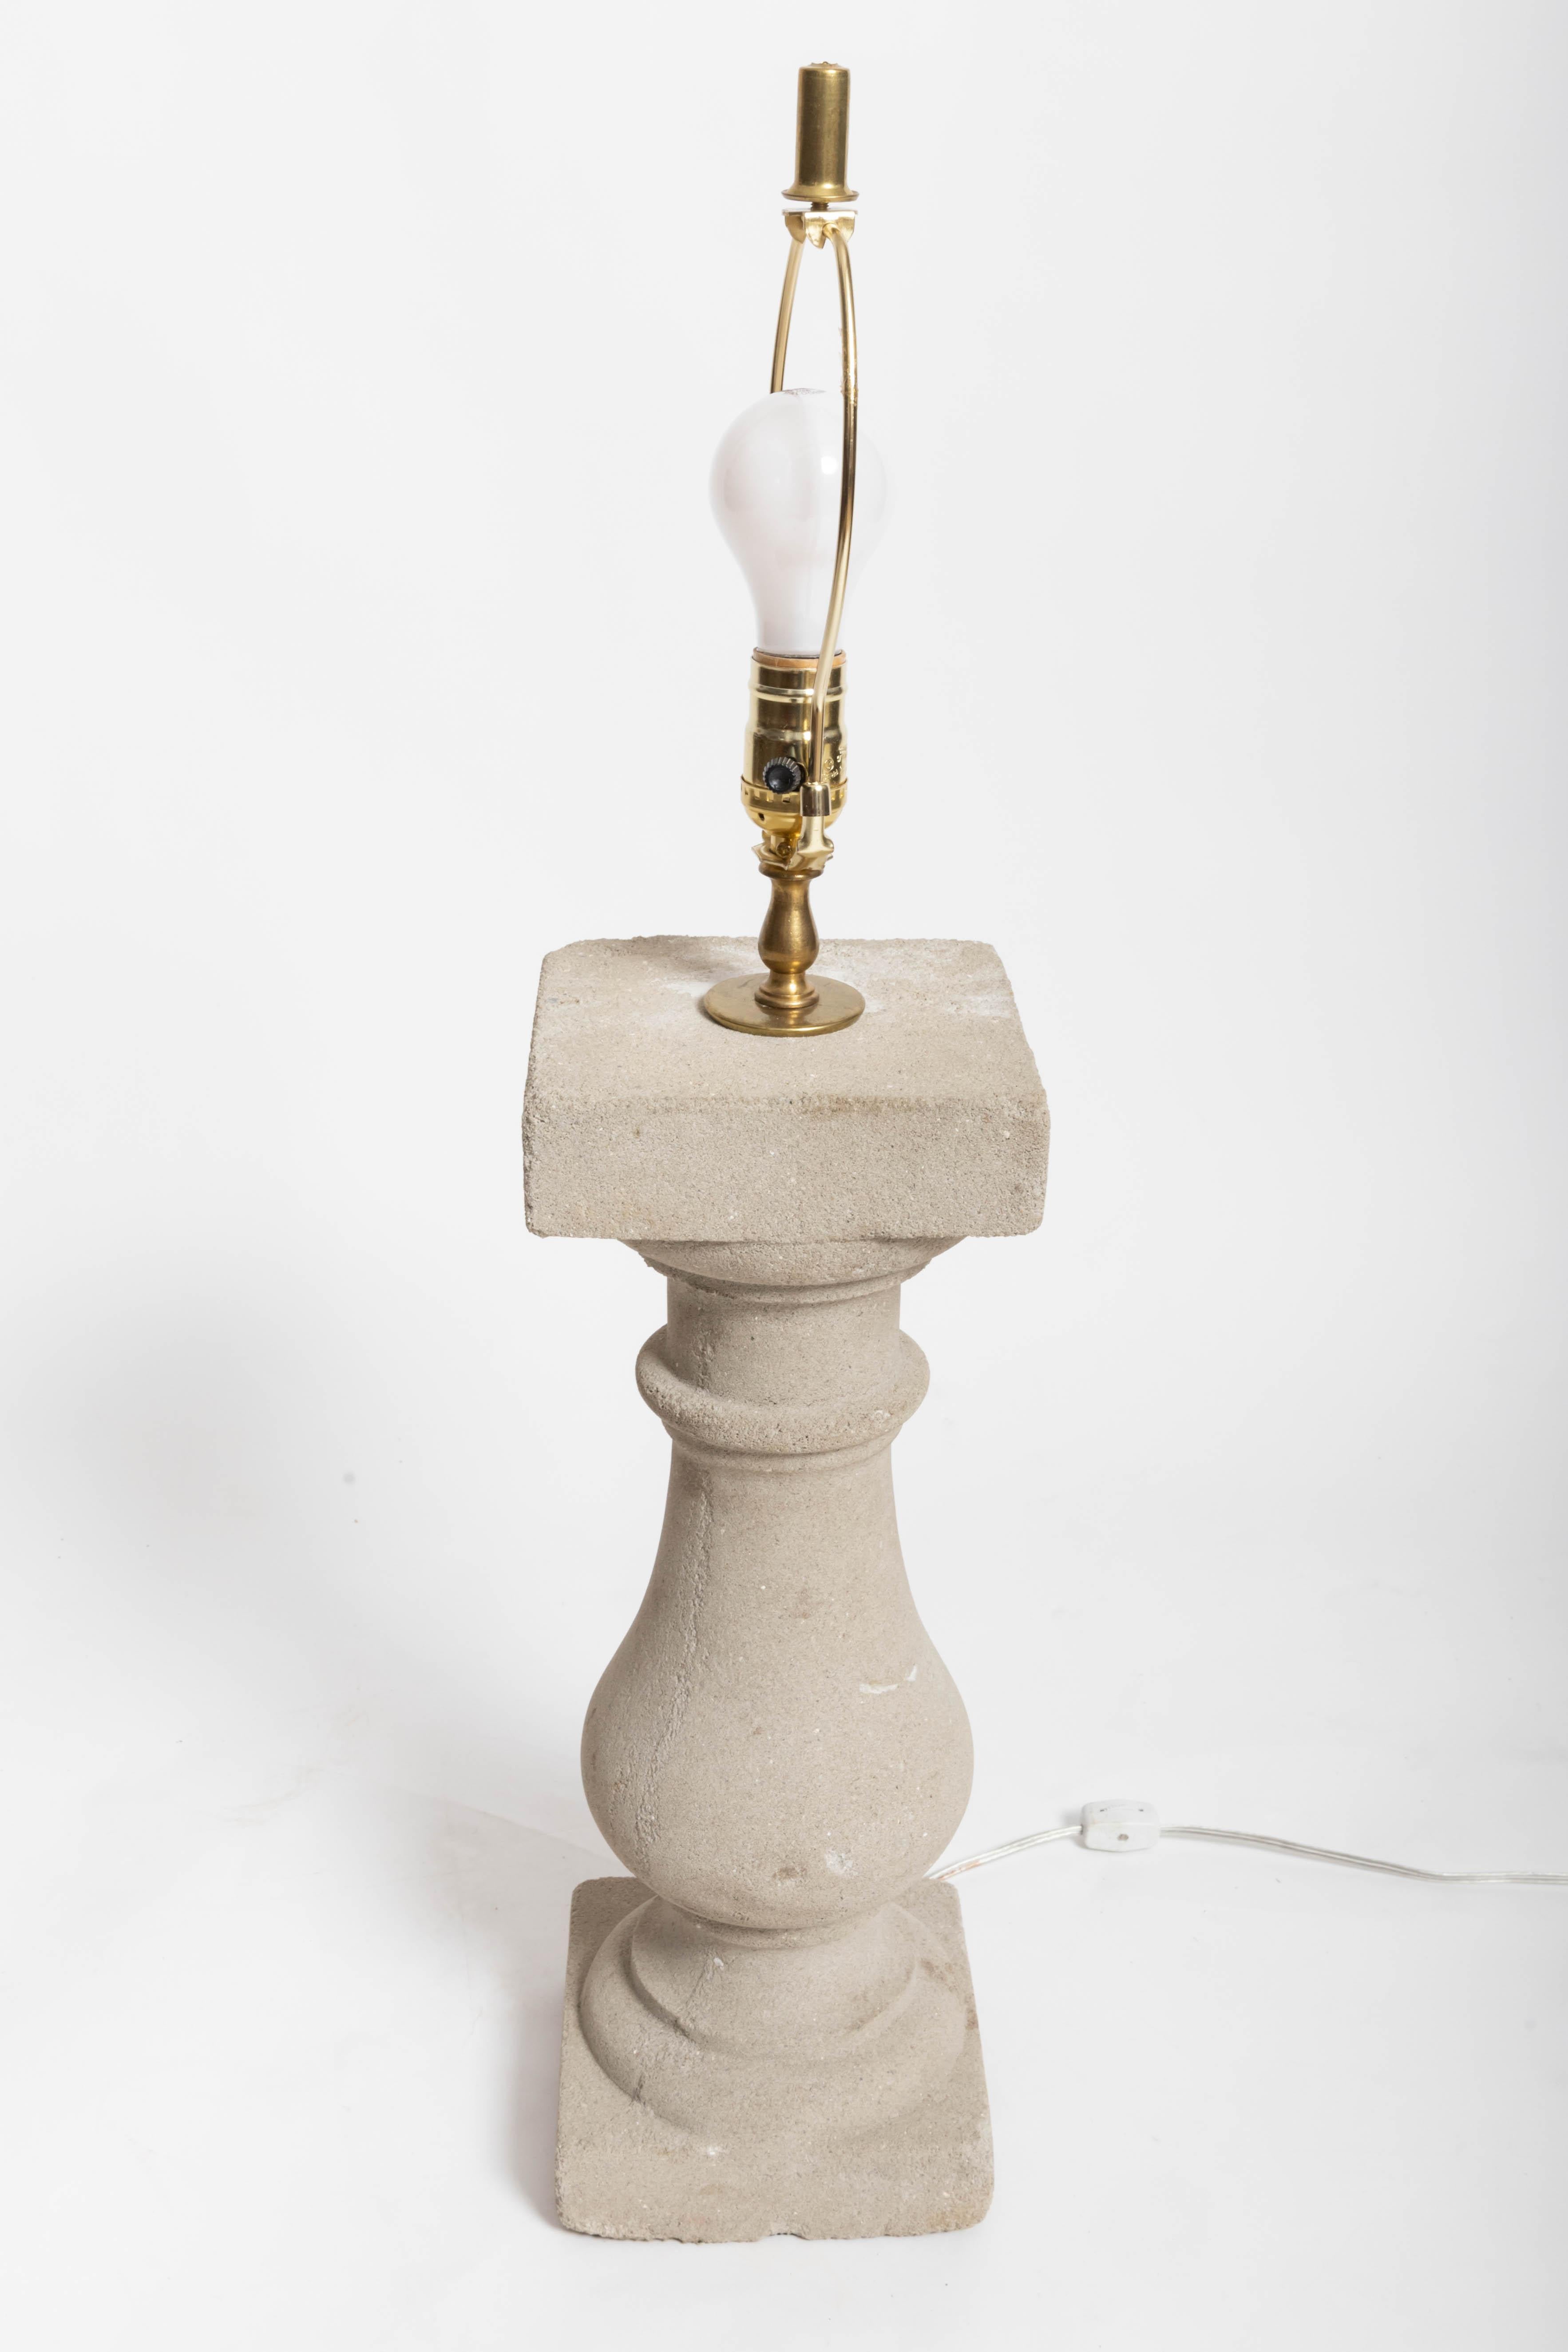 stone lamps for sale